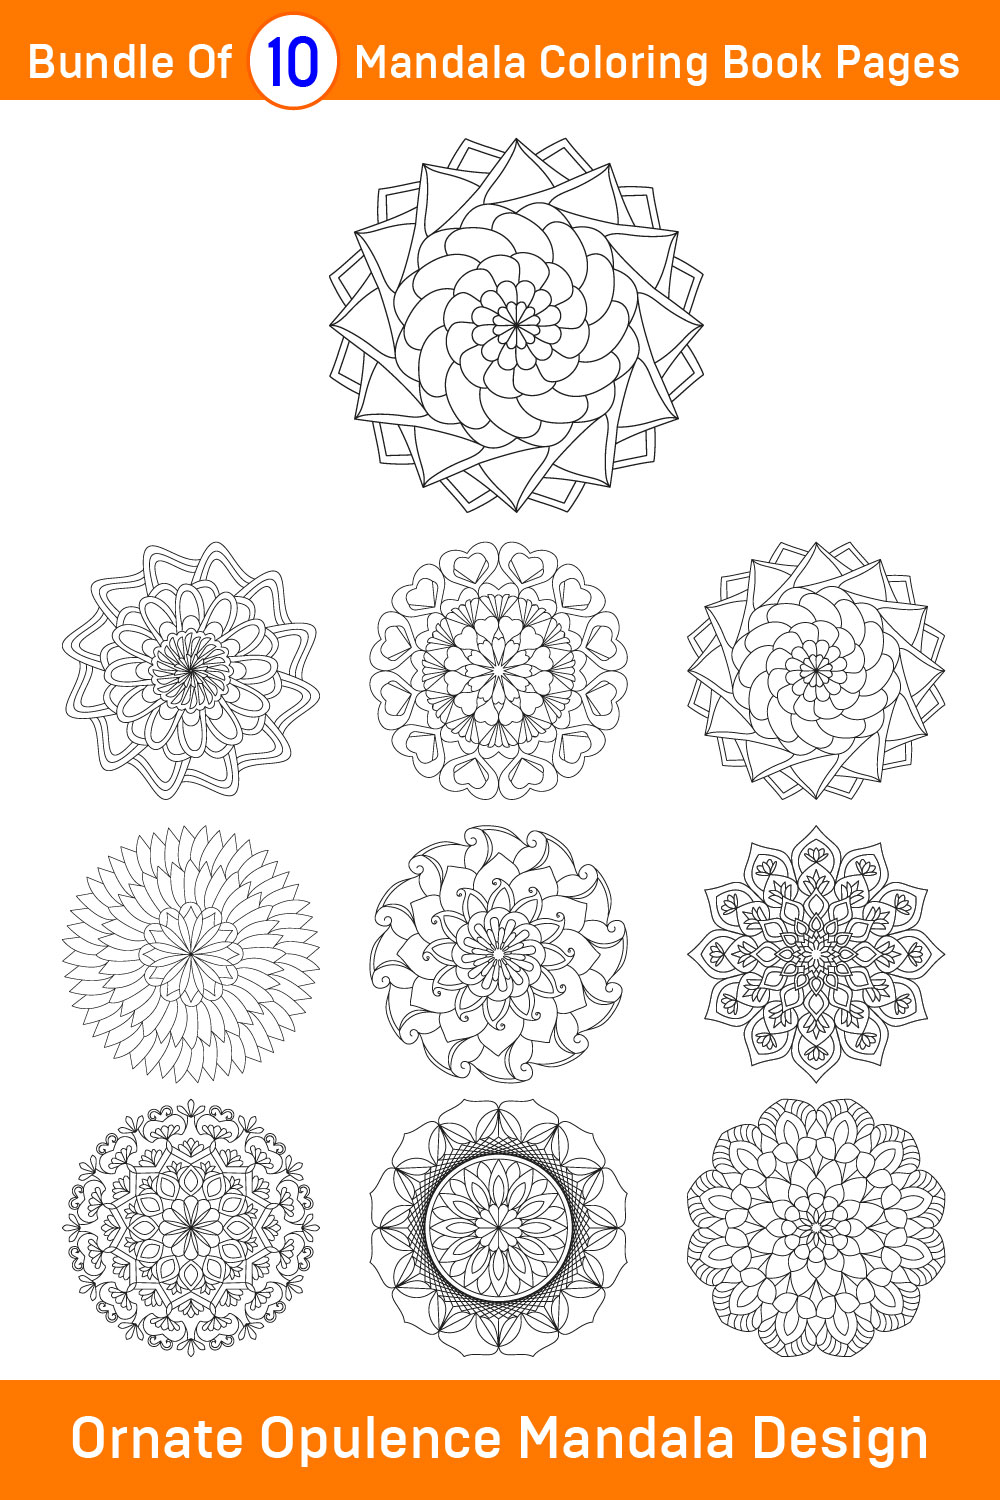 Bundle of 10 Ornate Opulence Mandala for KDP Coloring Book interior Pages pinterest preview image.